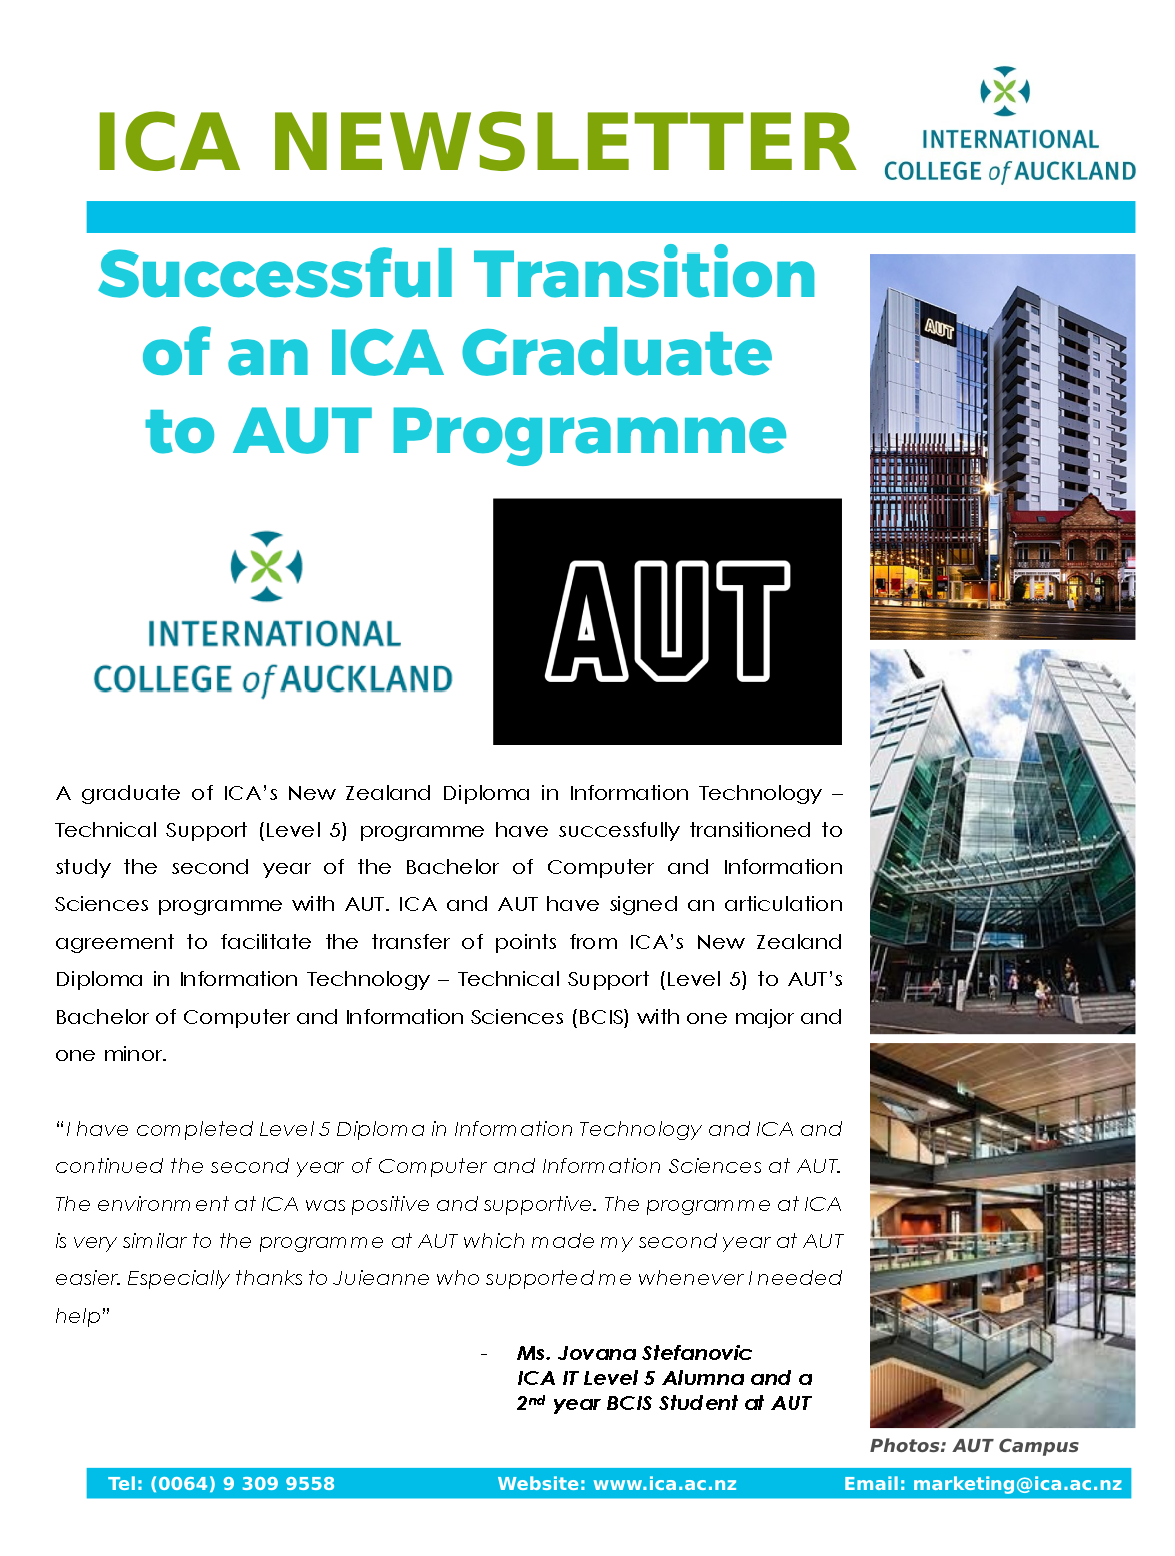 Successful Transition of an ICA graduate to AUT programme